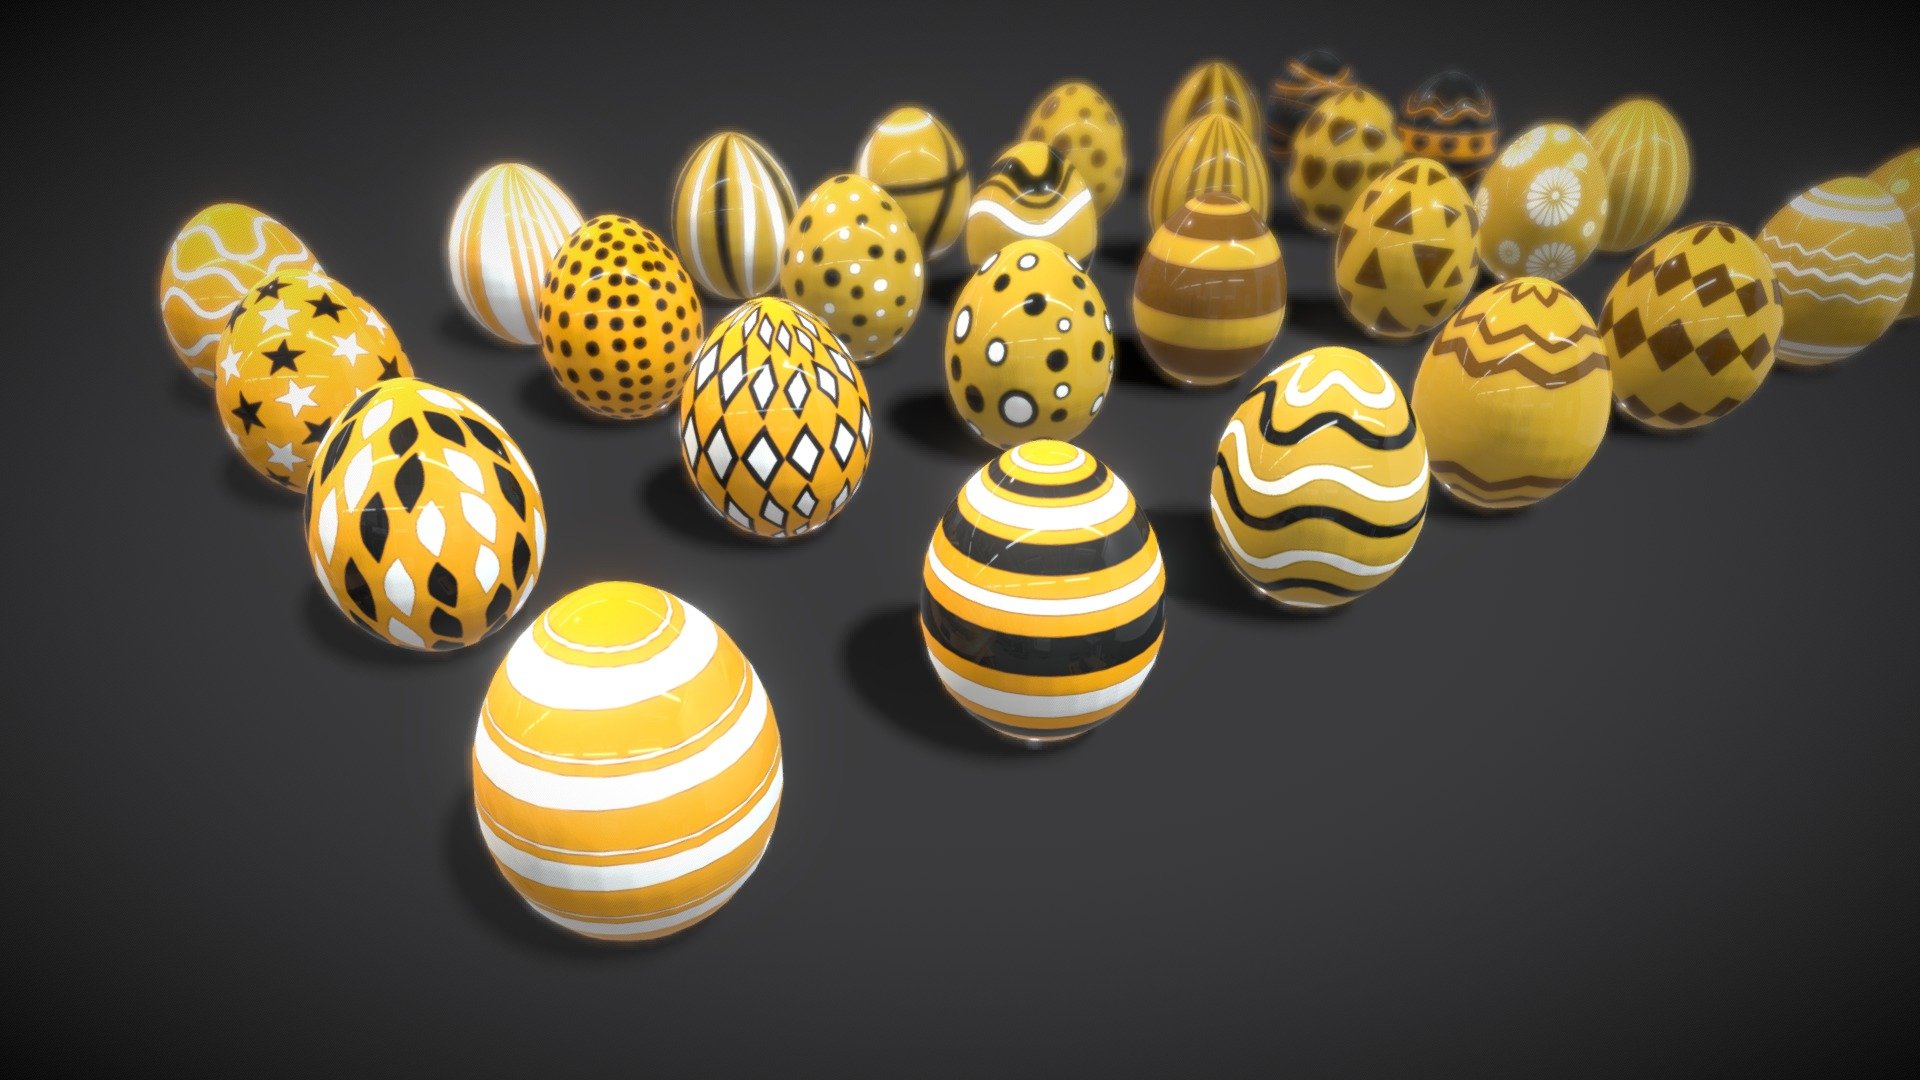 Get ready for Easter!

Collections Easter Eggs 6 model low-poly 3d model ready for Virtual Reality (VR), Augmented Reality (AR), games and other real-time apps. its ready for rendering and advertising too Features: 
- 28 egg prefabs 
-  7 Colections styles texture 
-   Polycount list : 
-    Model 3D lowpoly Eggs ( 16128 polys/30464 Tris/15288 Verts) 
-    7 Texture colections size 1024/1024 Please contact me if you have questions or need assistance with the models 3d model